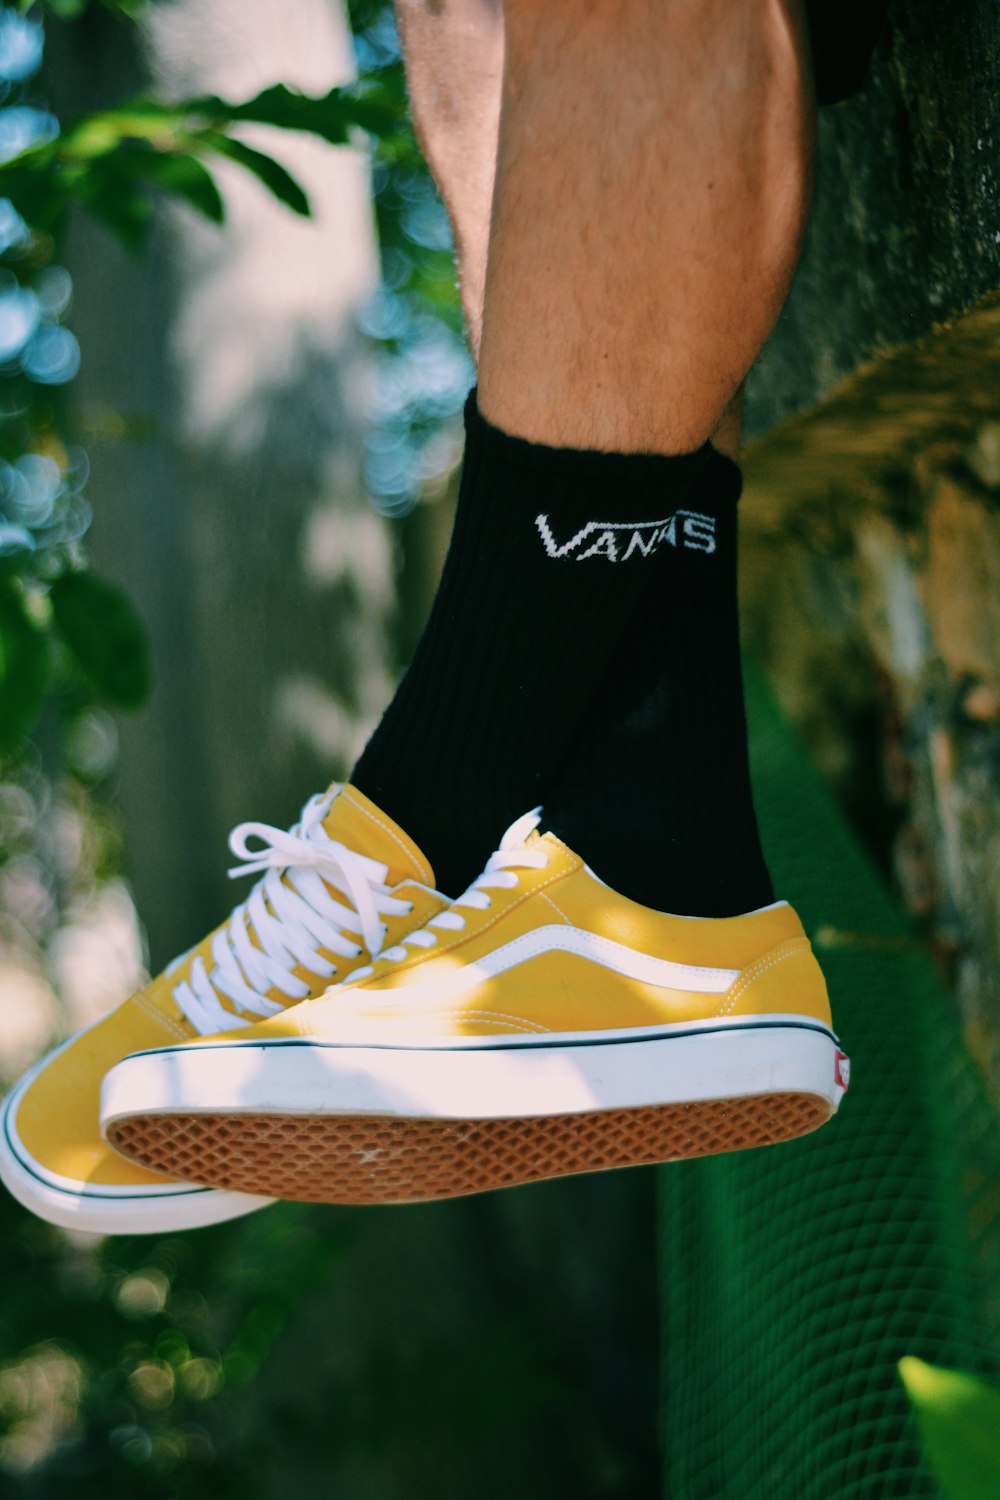 Pair of yellow-and-white Vans low-top shoes photo – Free Clothing Image on  Unsplash